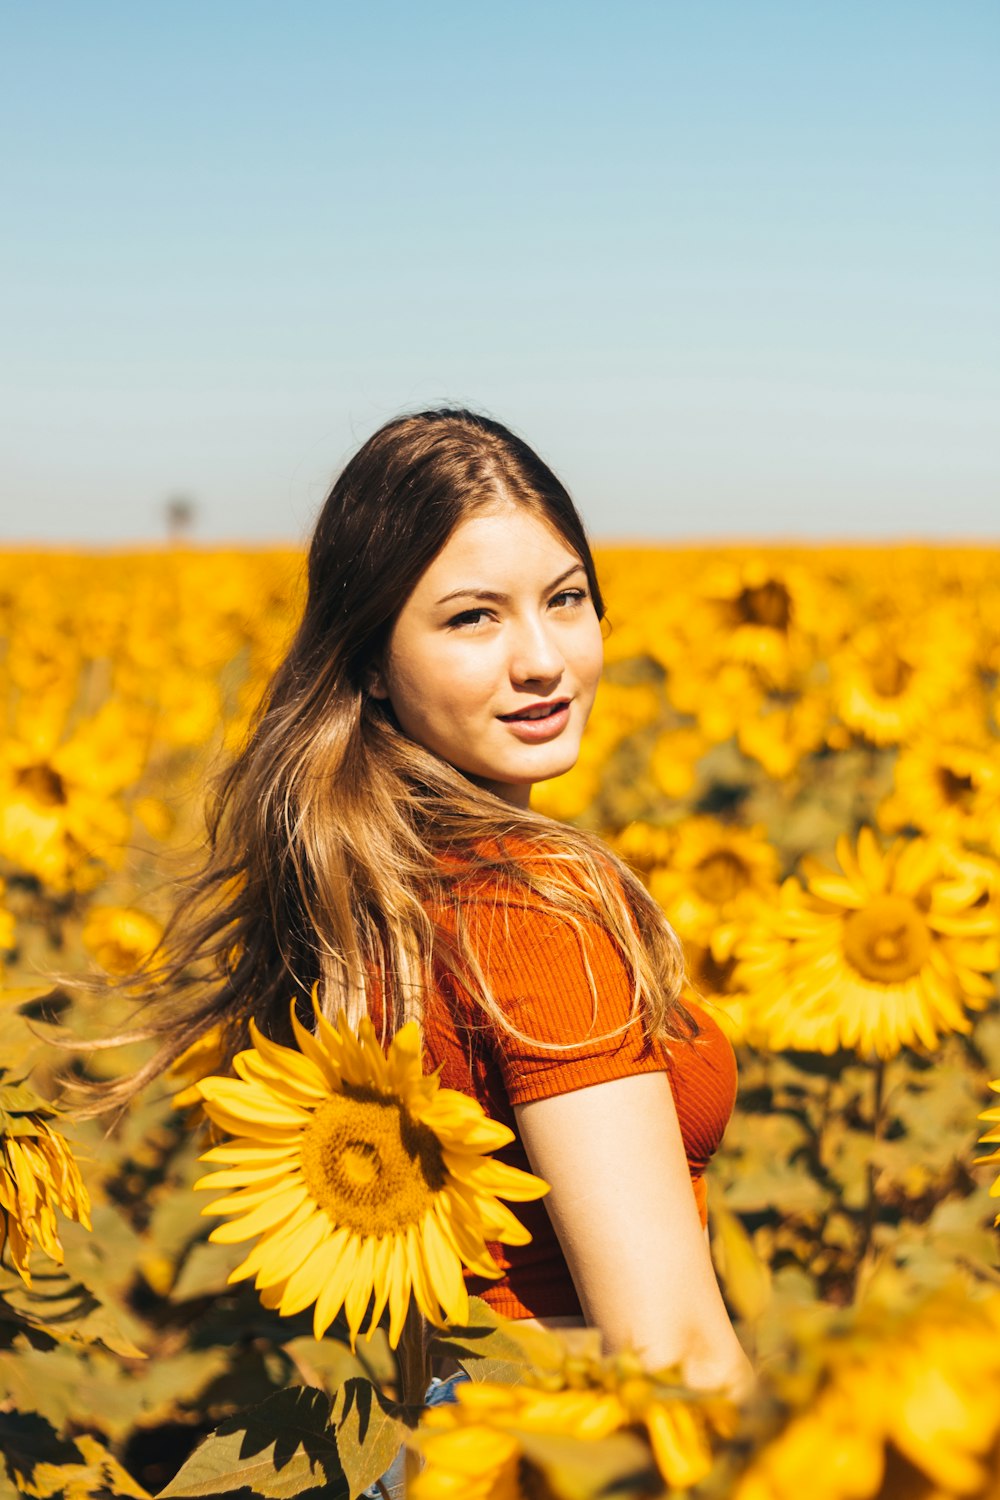 woman in orange and white stripe shirt standing on sunflower field during daytime